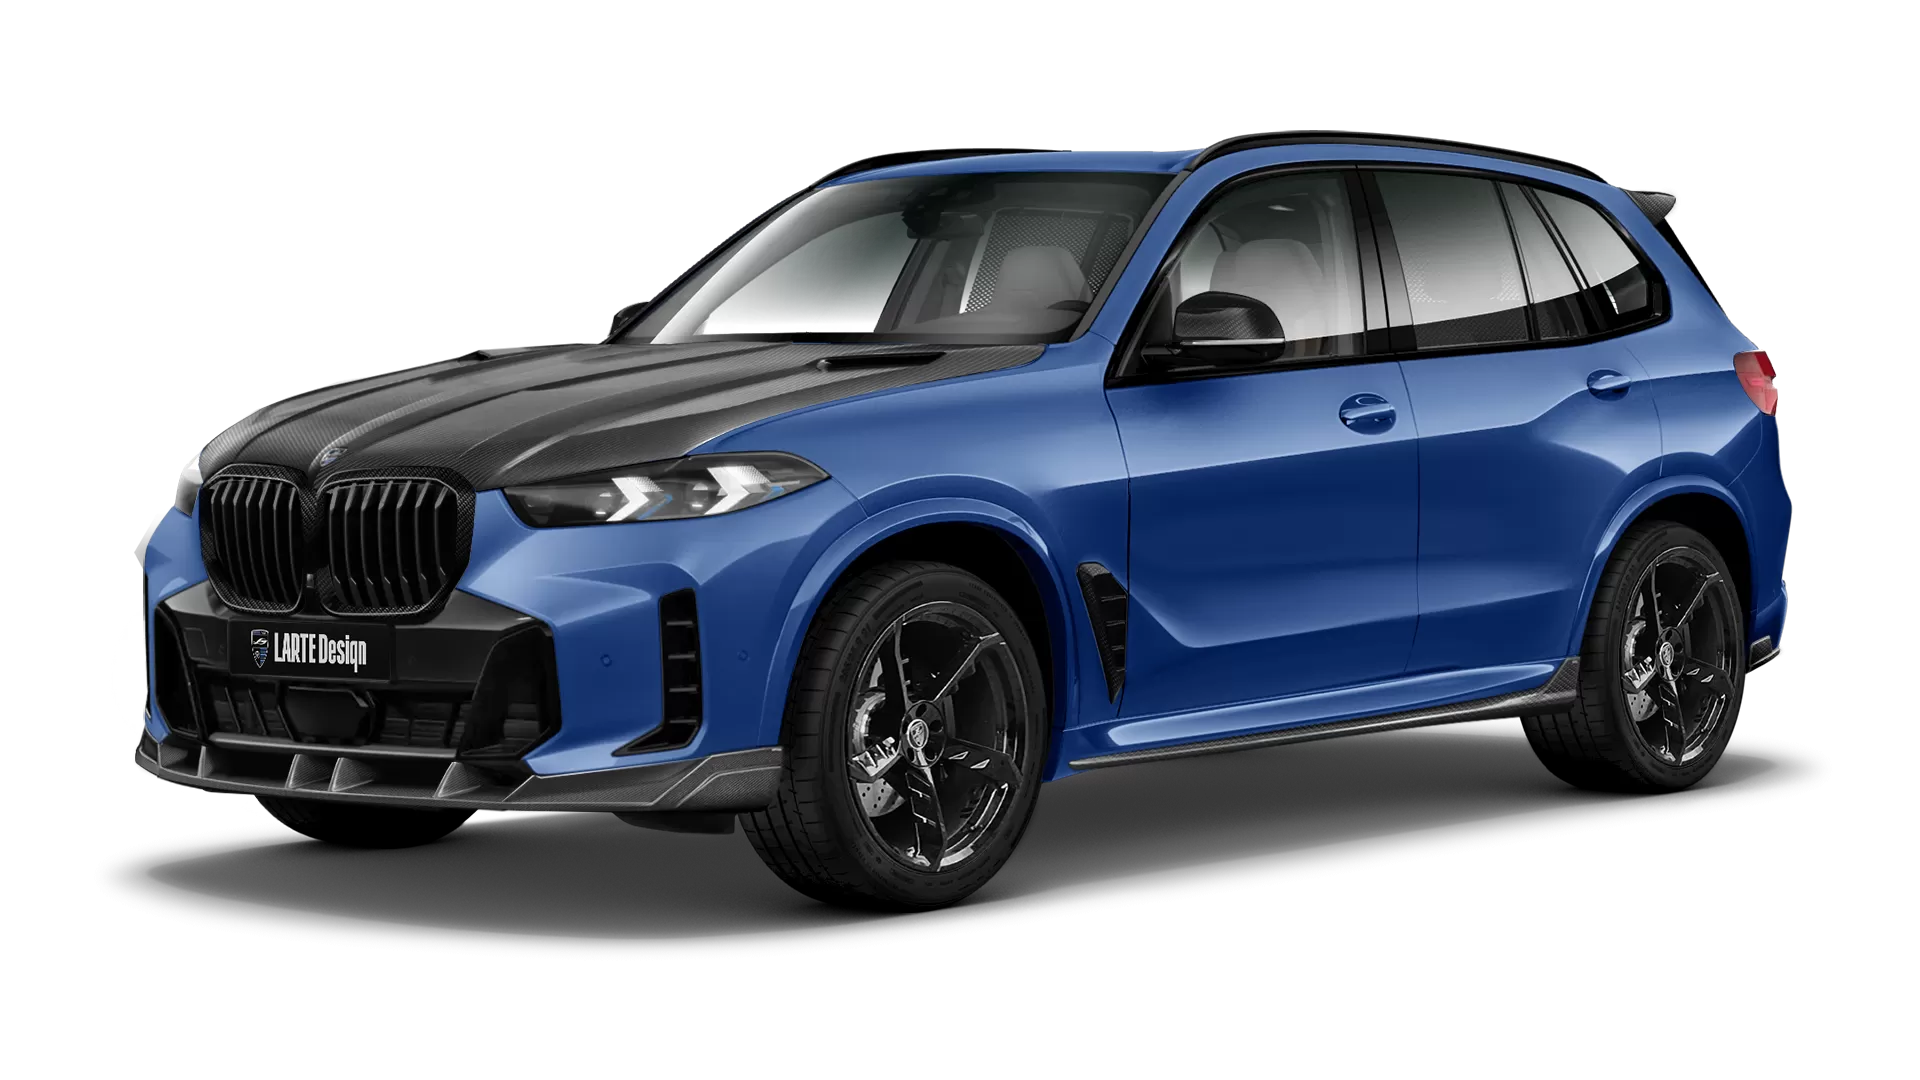 BMW X5 G05 LCI Facelift with carbon body kit: front view shown in Marina Bay Blue